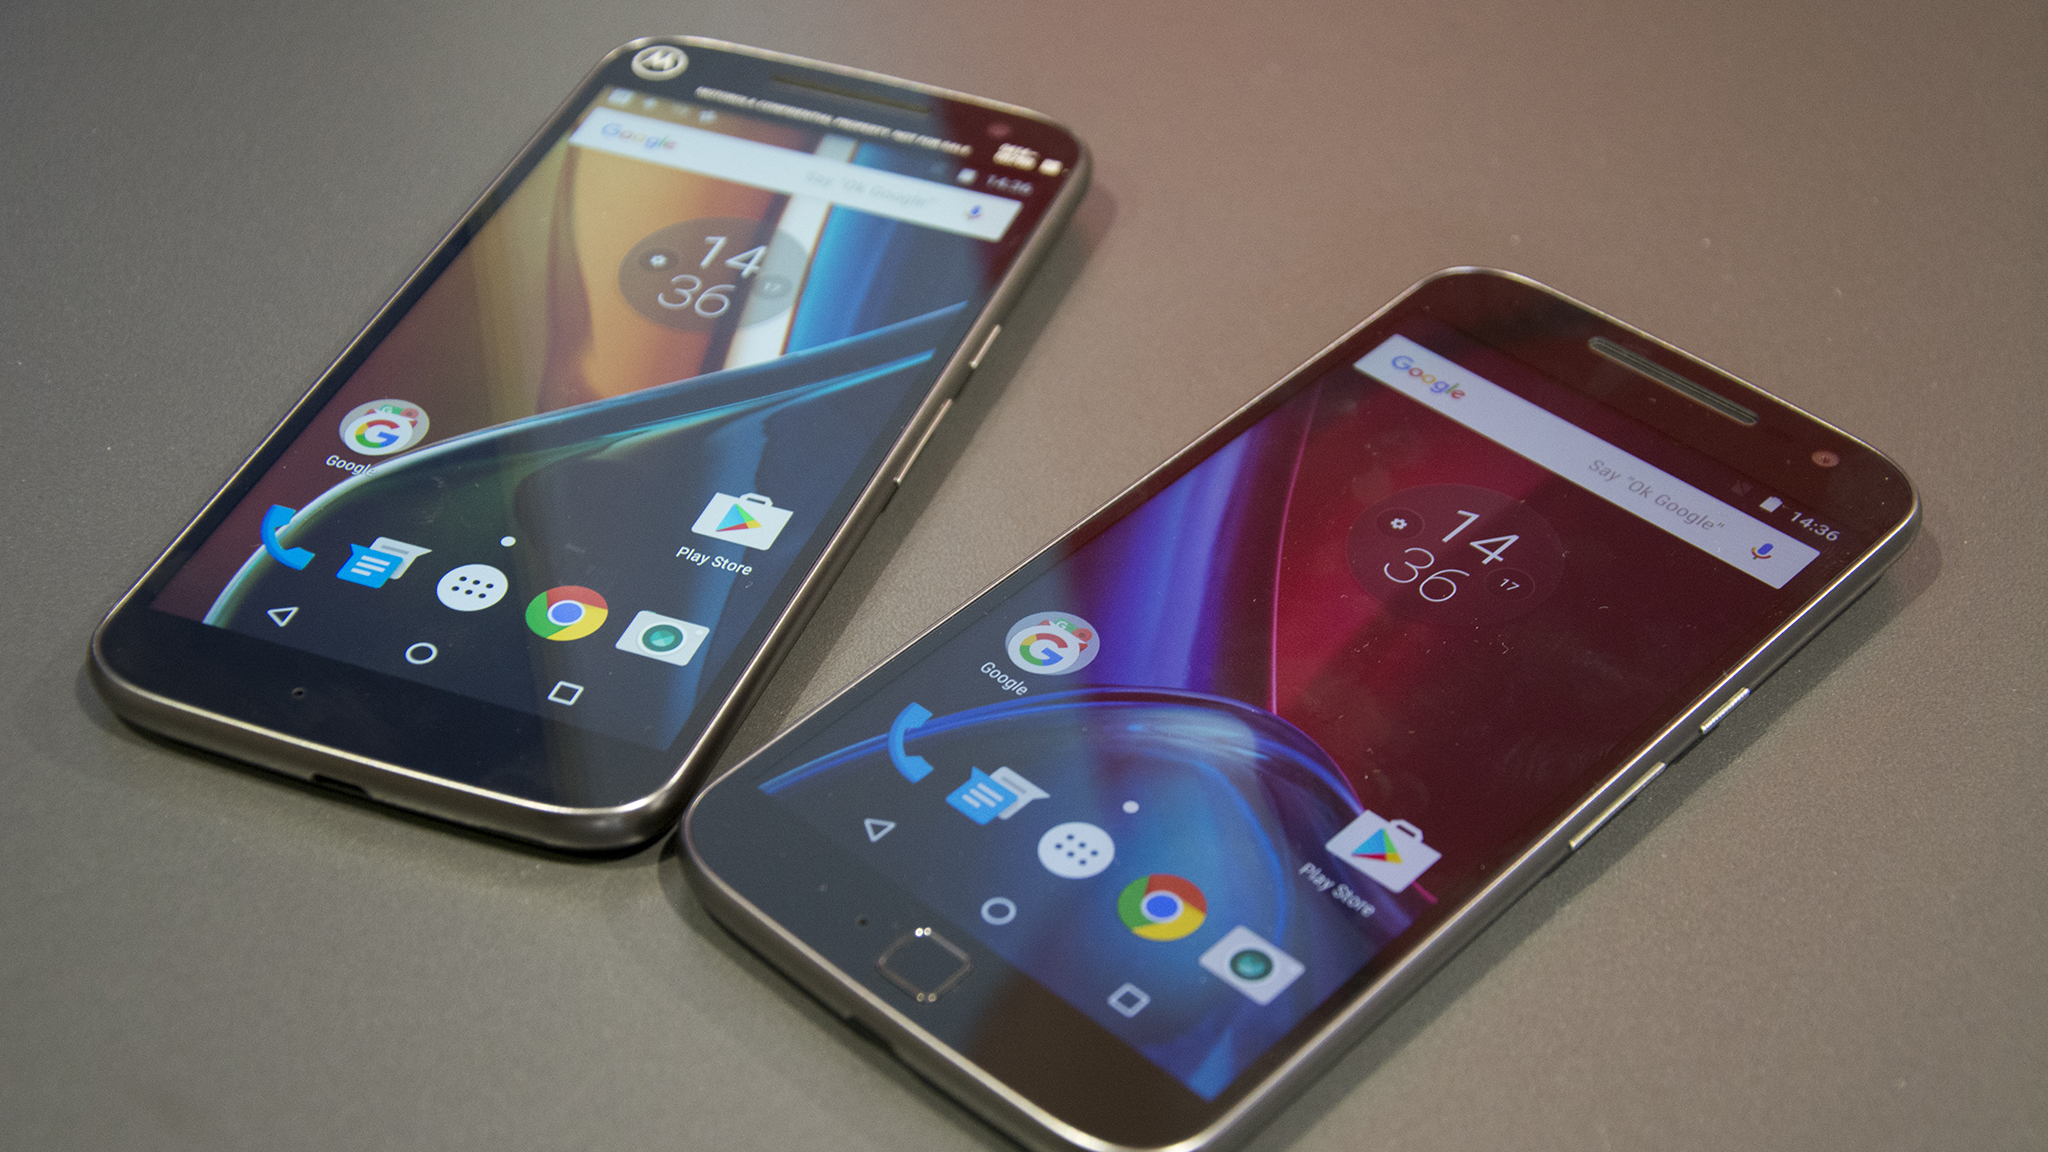 Motorola Moto G4 and G4 Plus review (Hands-on): call the Moto G (4th Gen)